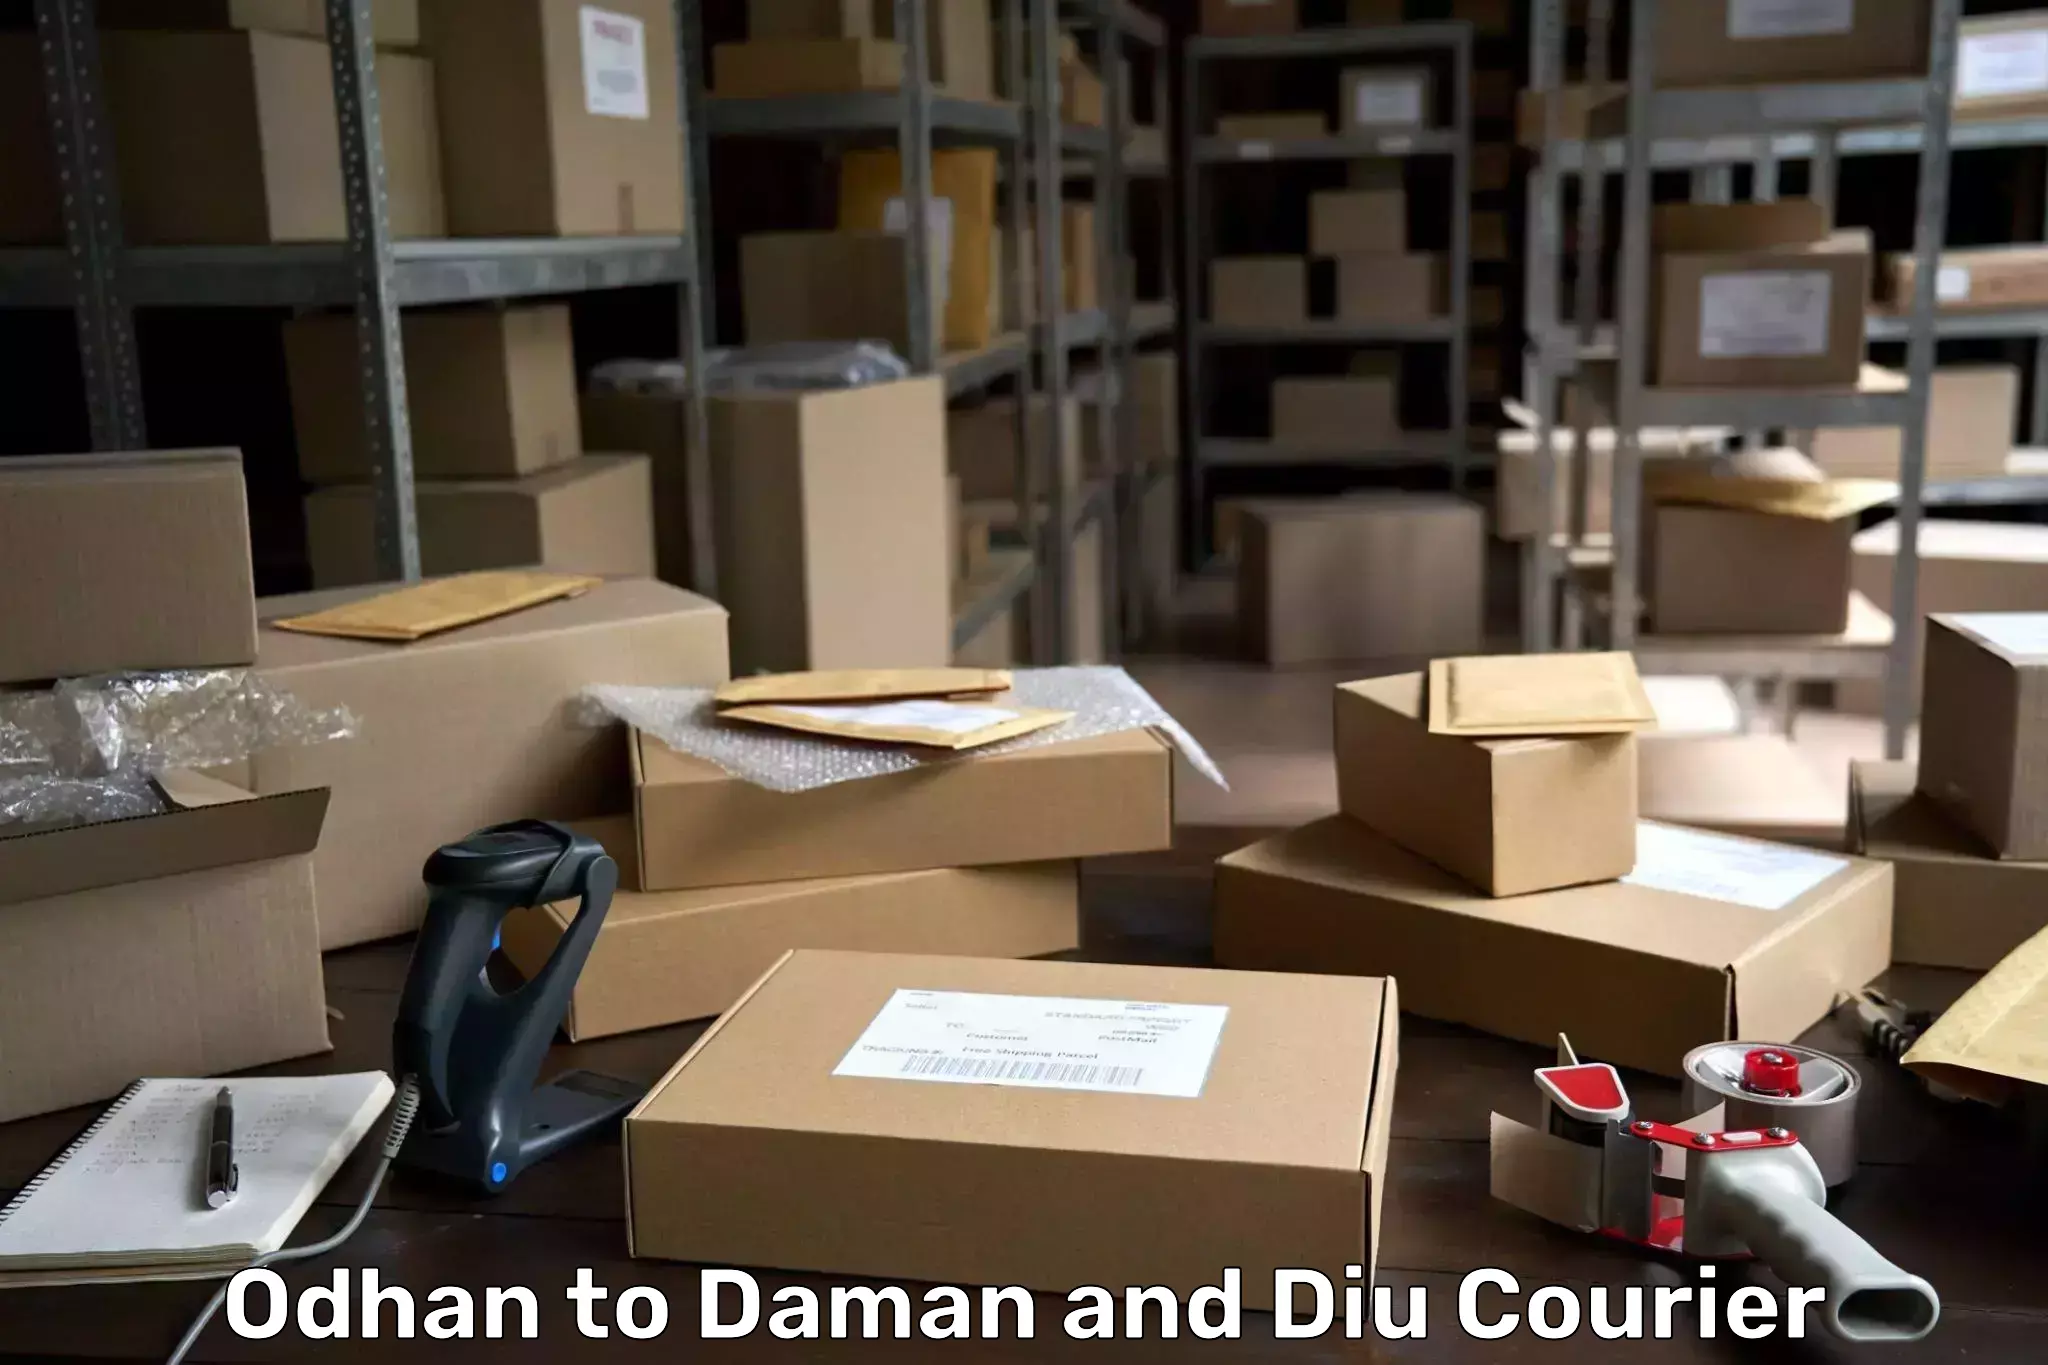 Courier service comparison Odhan to Daman and Diu